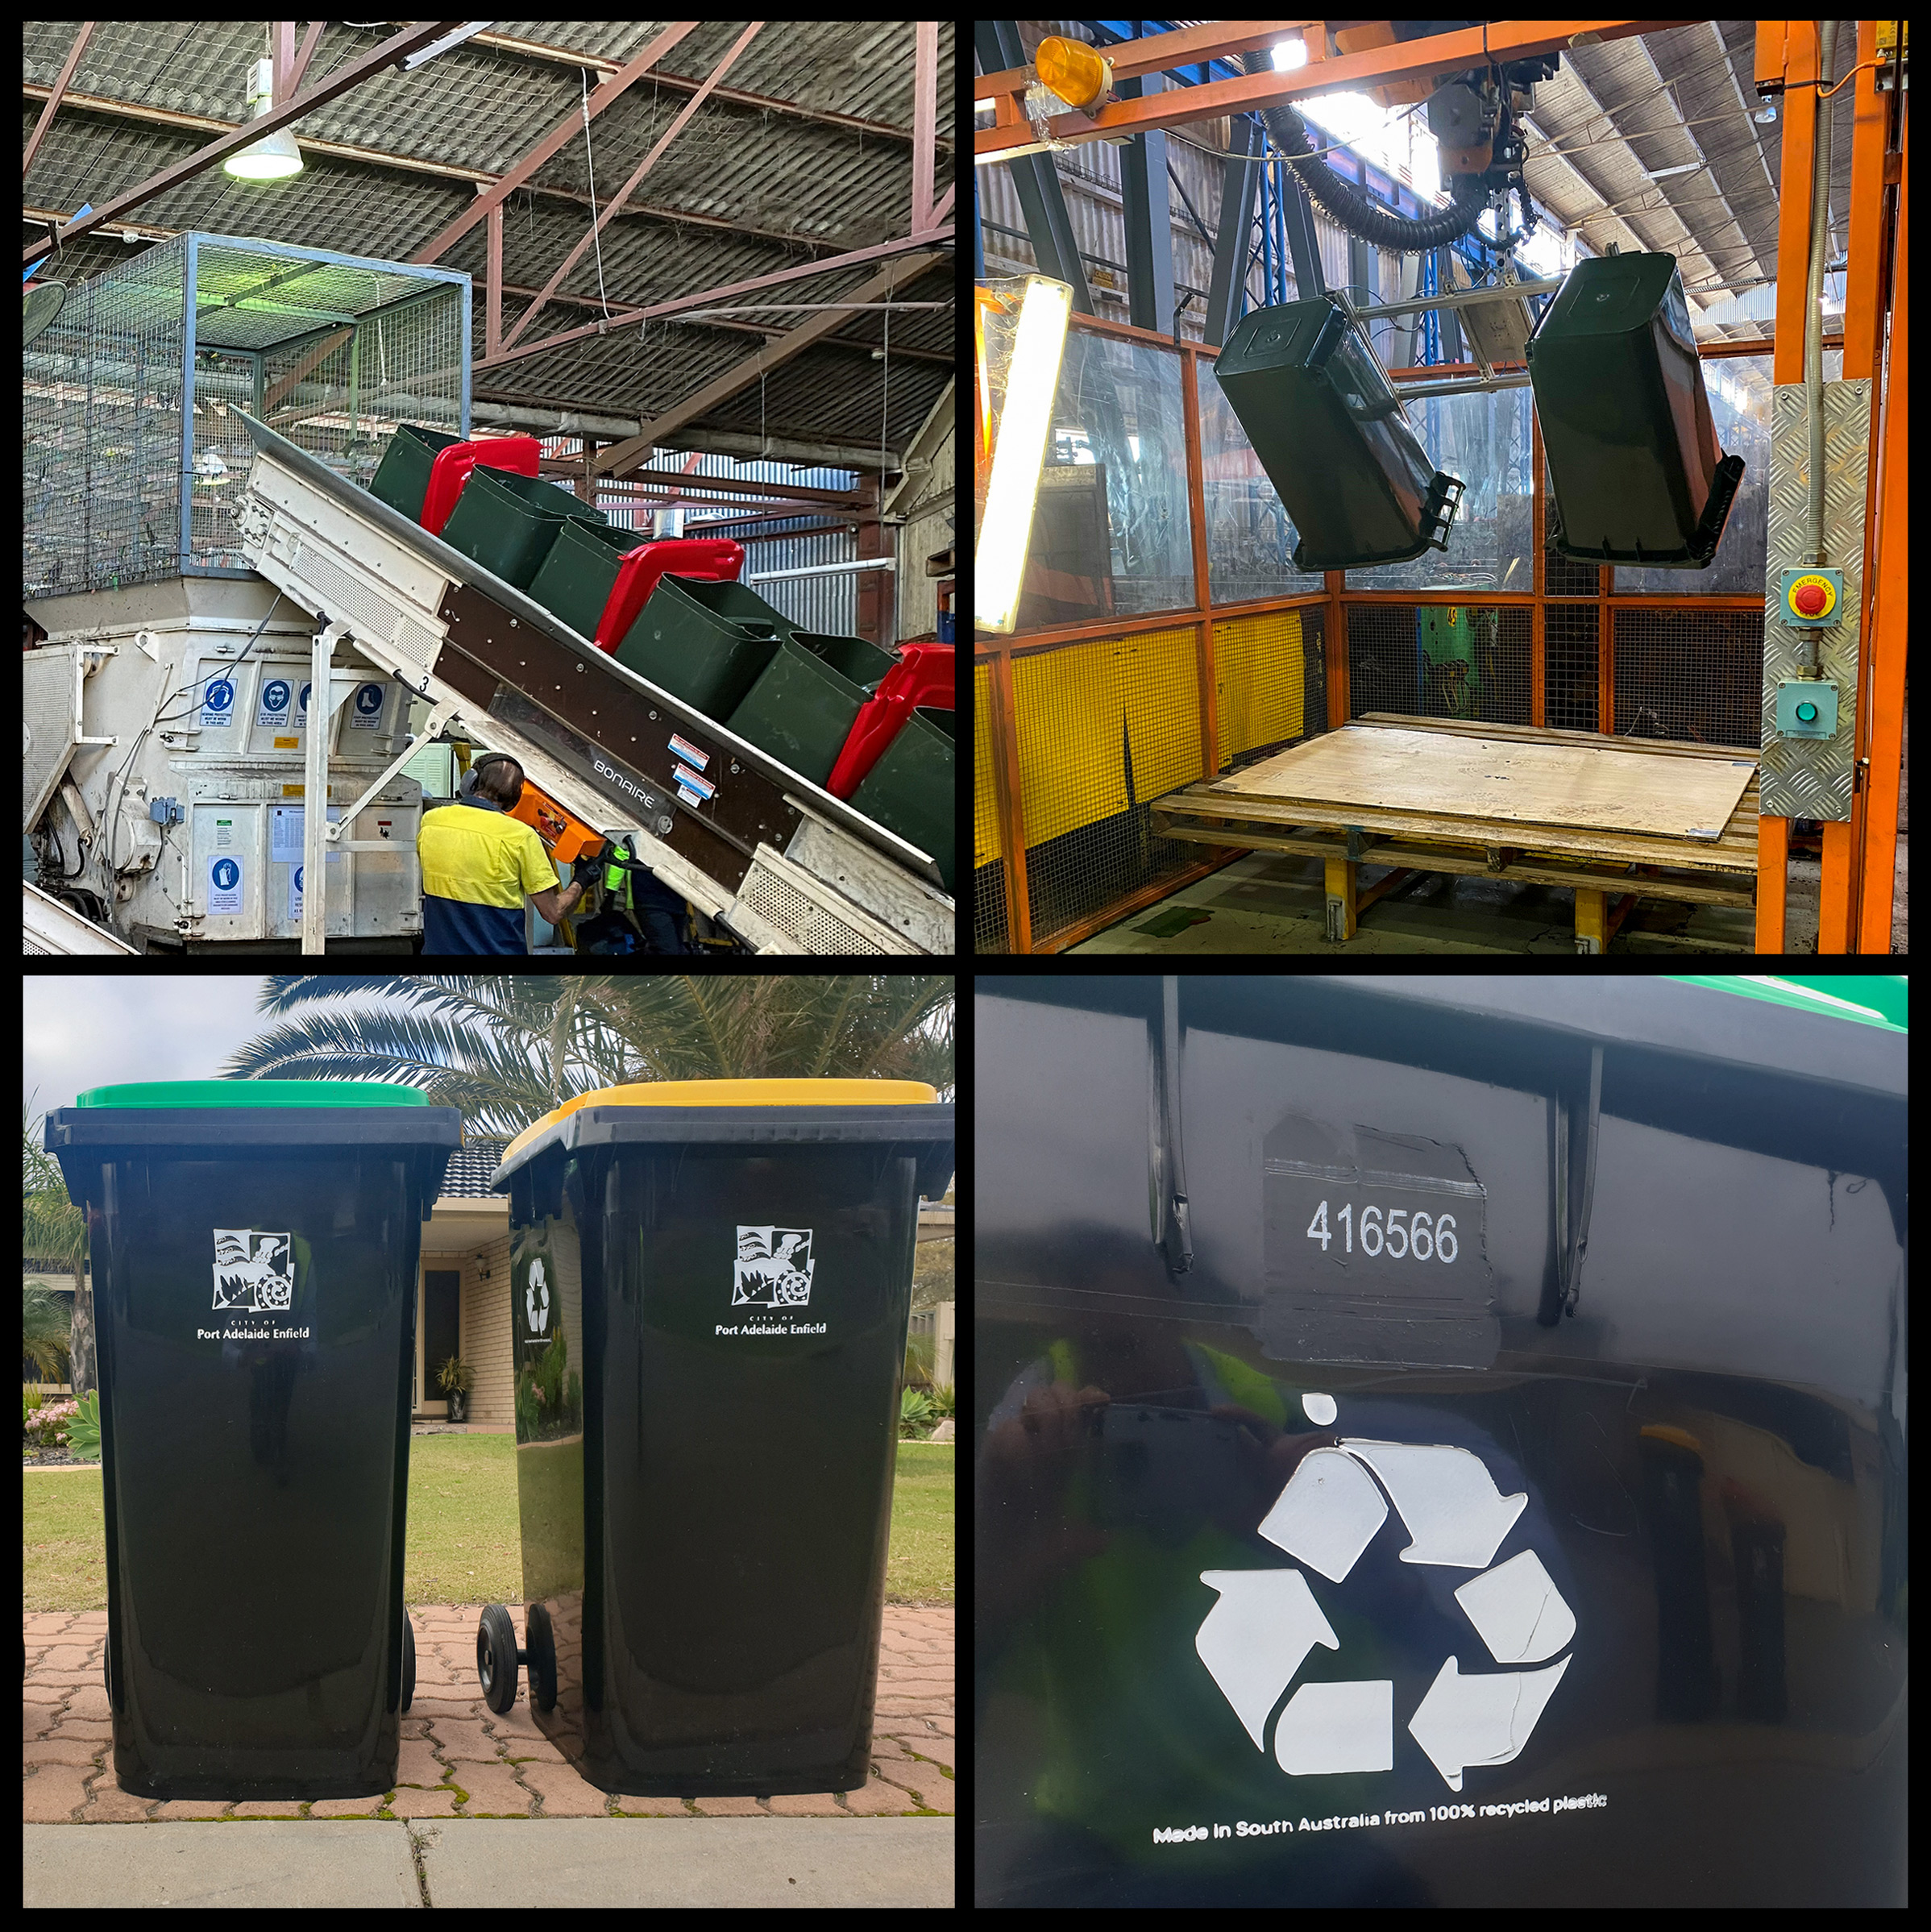 manufacturing process of bins made from 100% recycled plastic